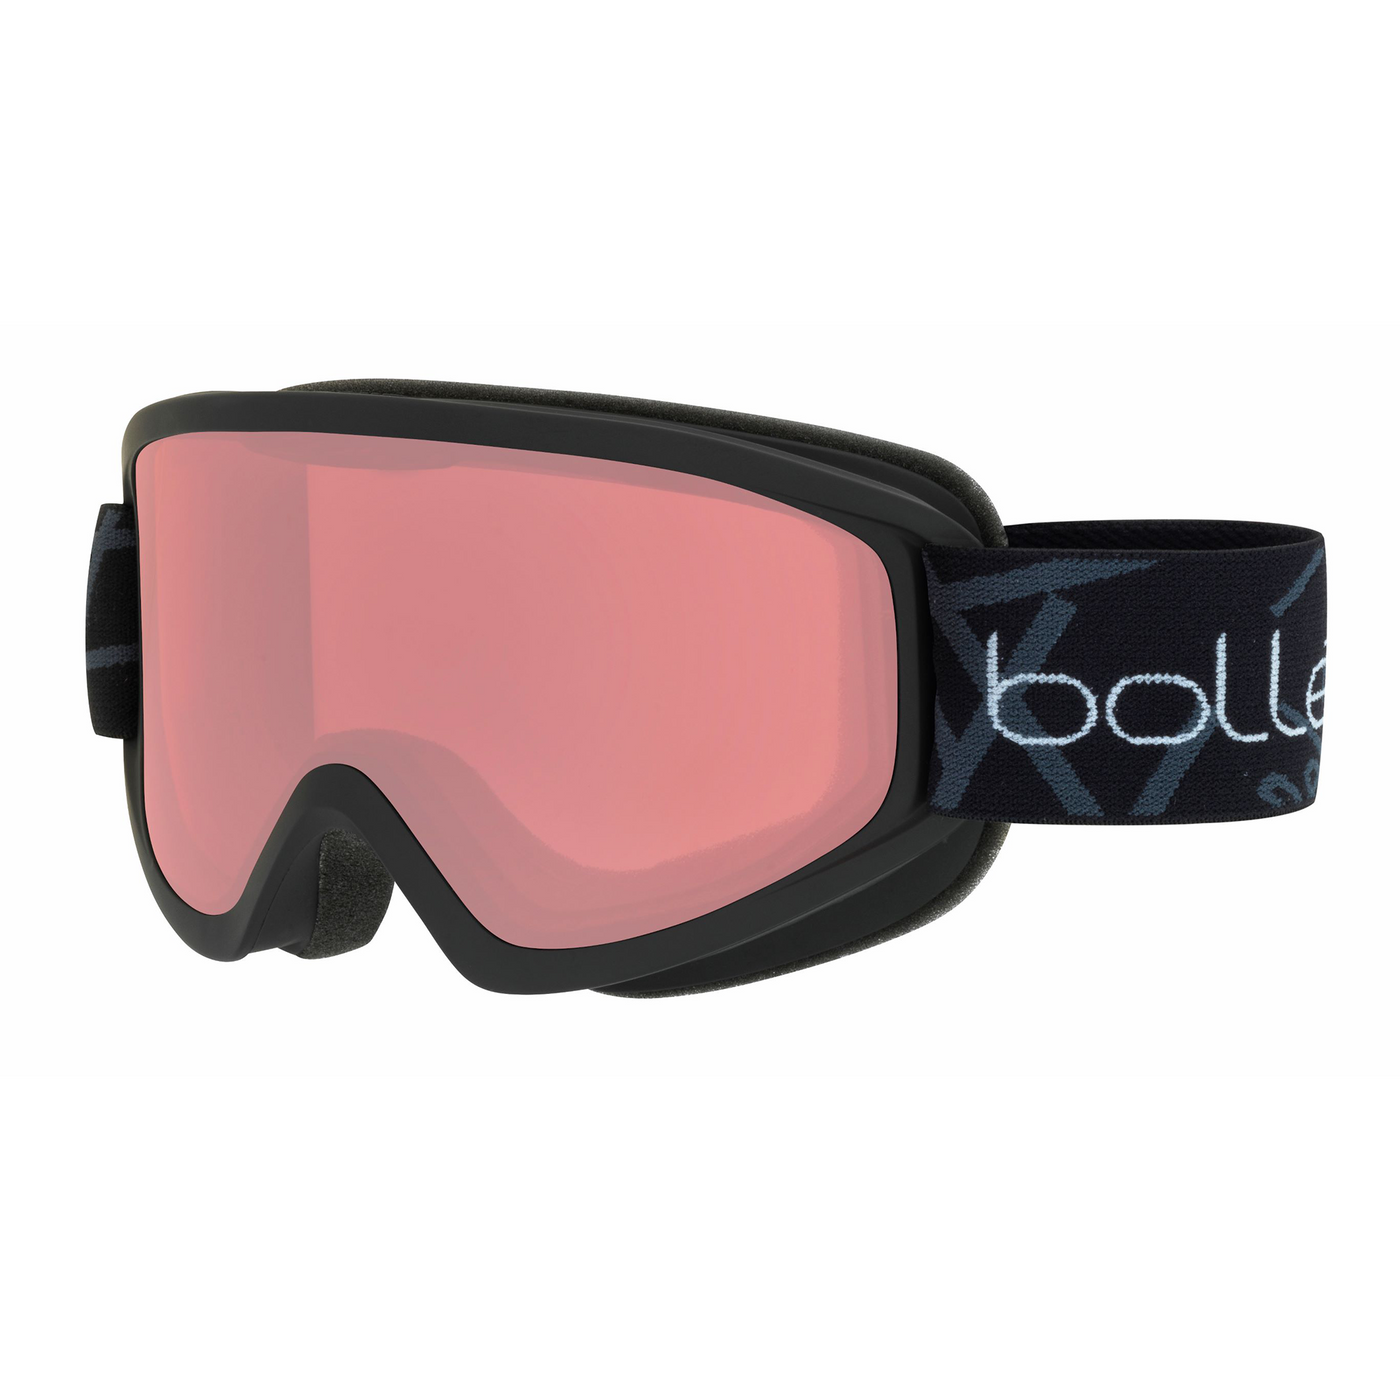 Bollé Freeze Ski Goggles - DISCONTINUED GOGGLES Bolle Matte Black with Vermillion Lens  